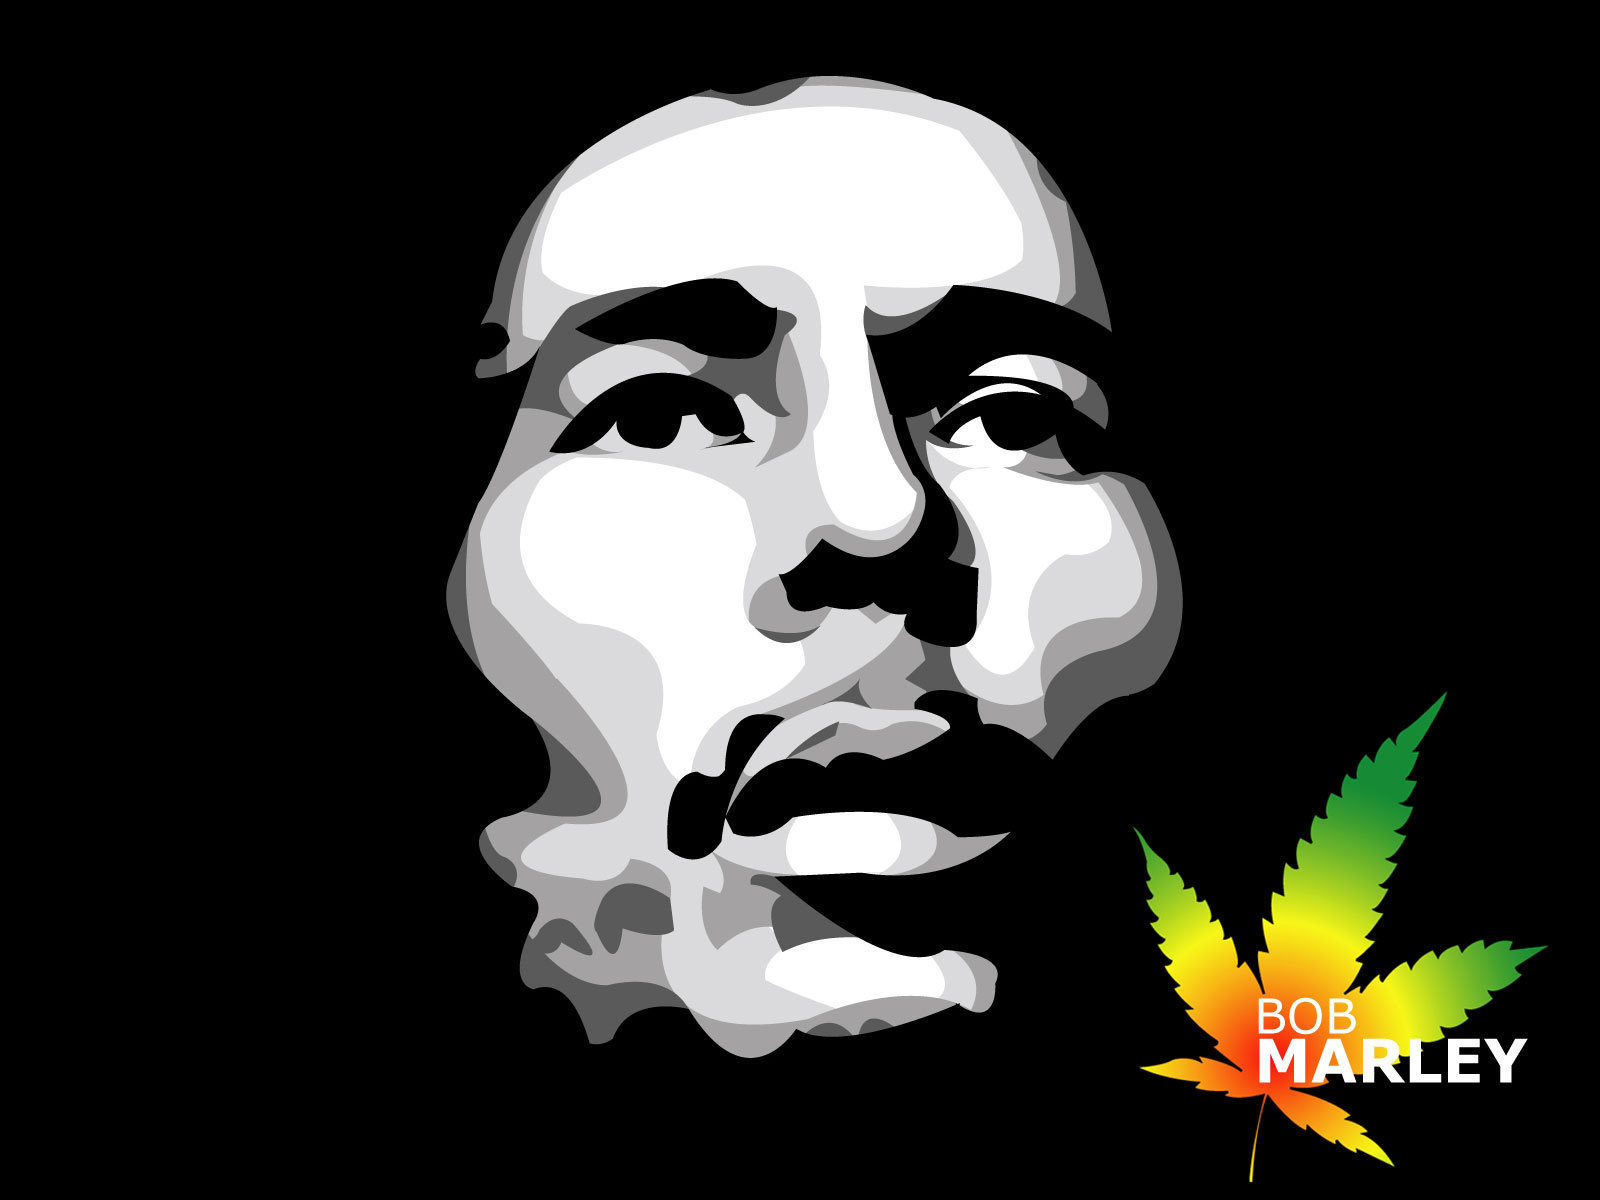 Bob marley wallpapers hd desktop and mobile backgrounds